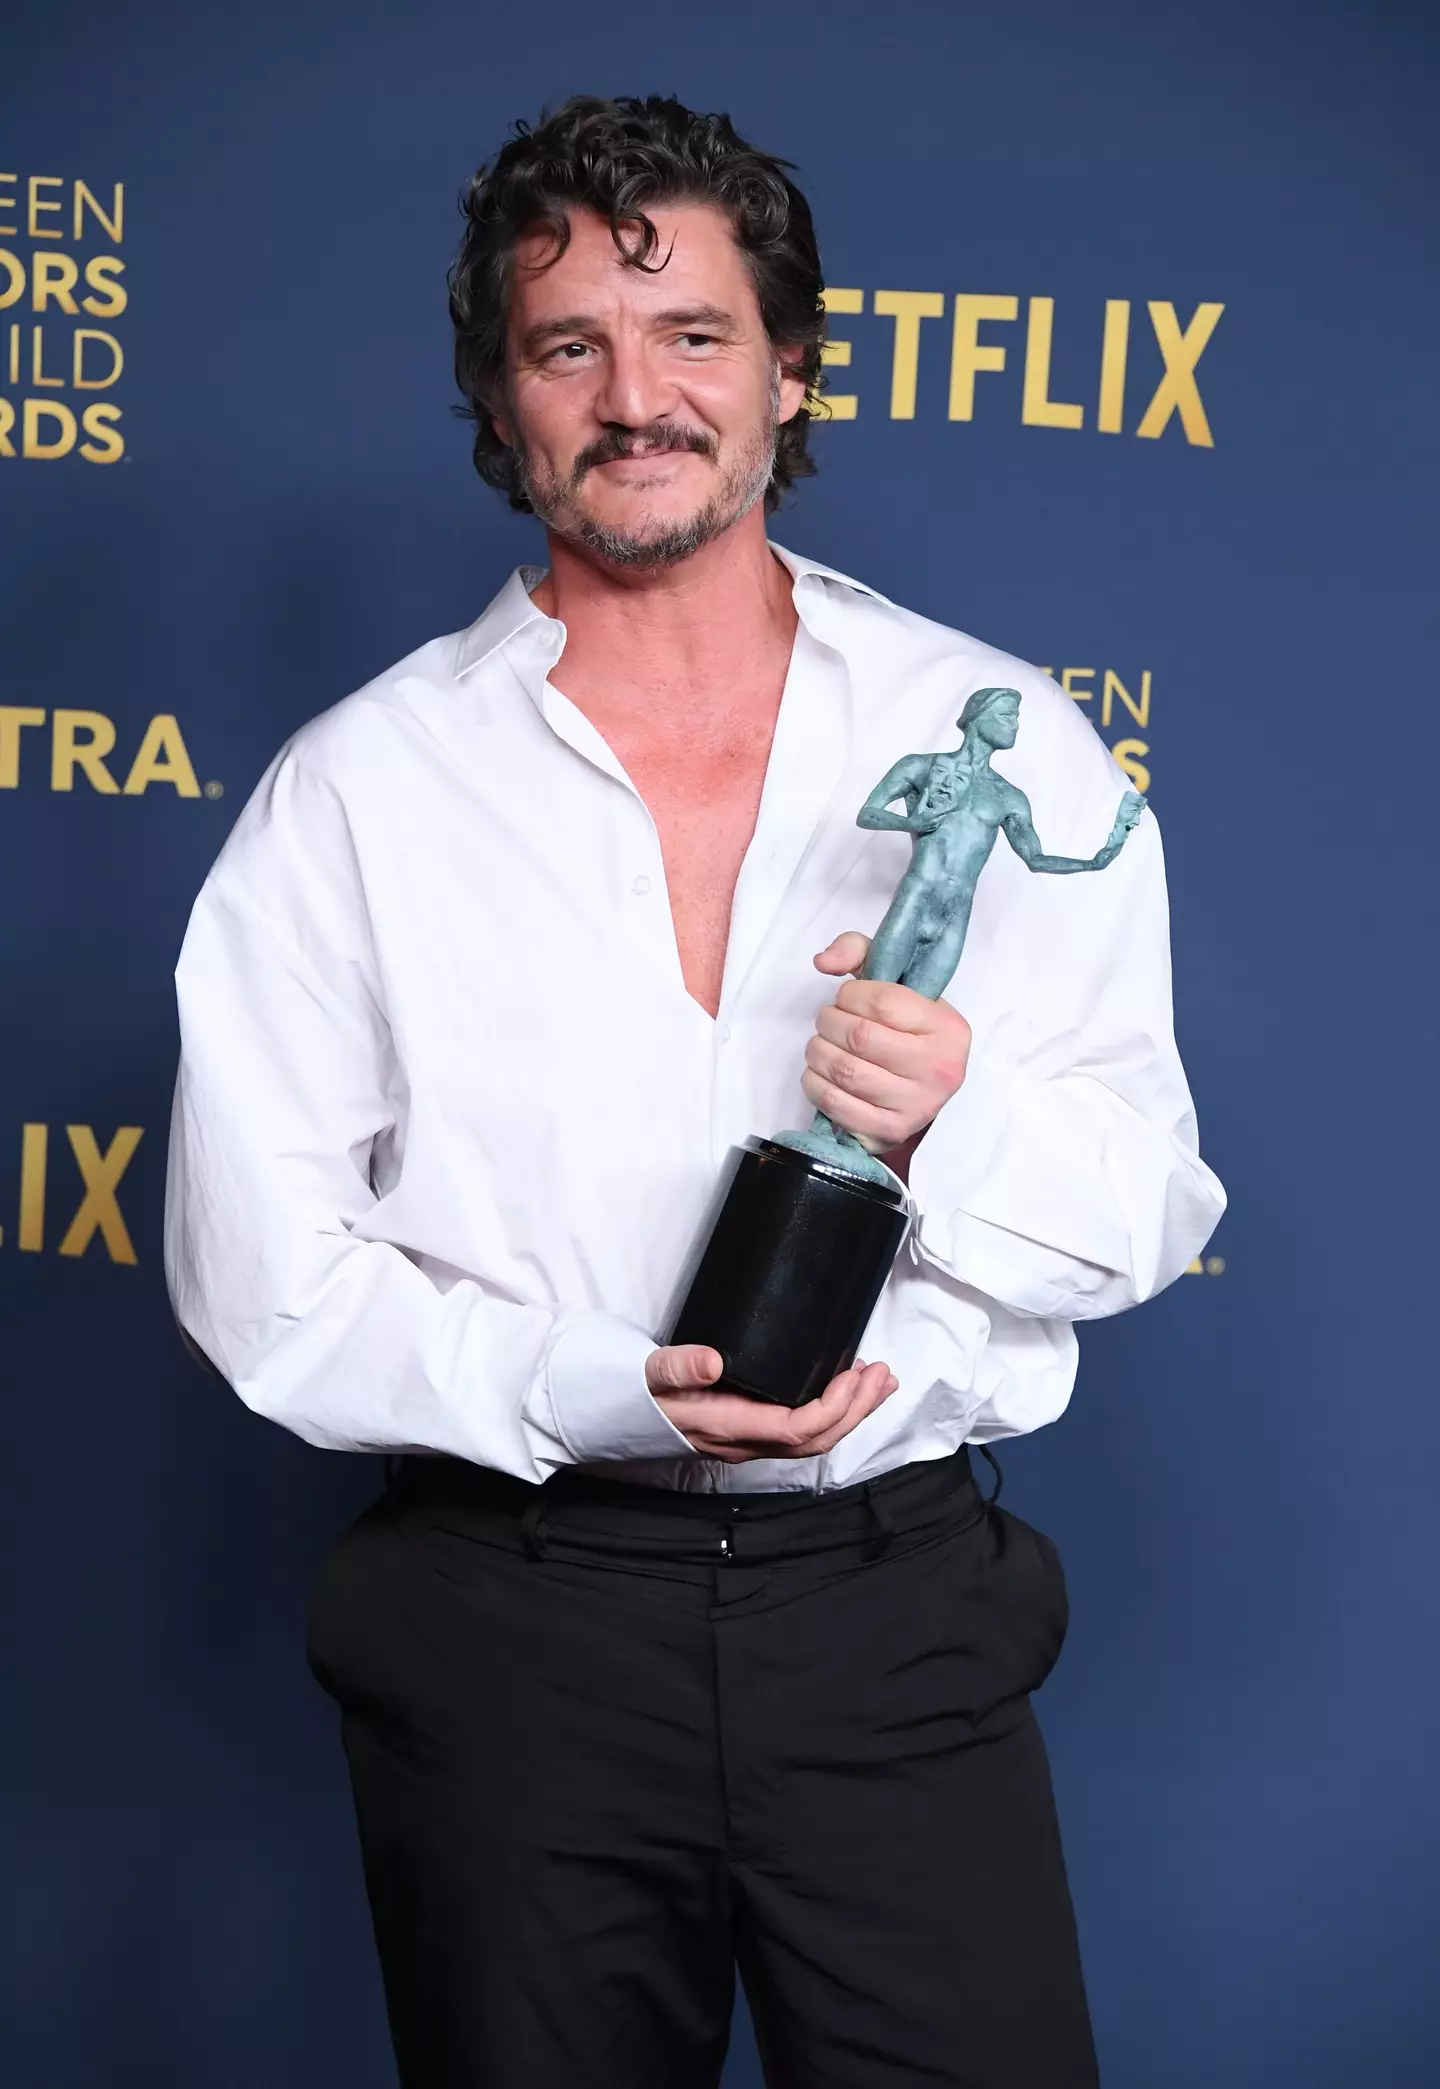 Pedro Pascal took home the award for Best Male Actor in a Drama Series.